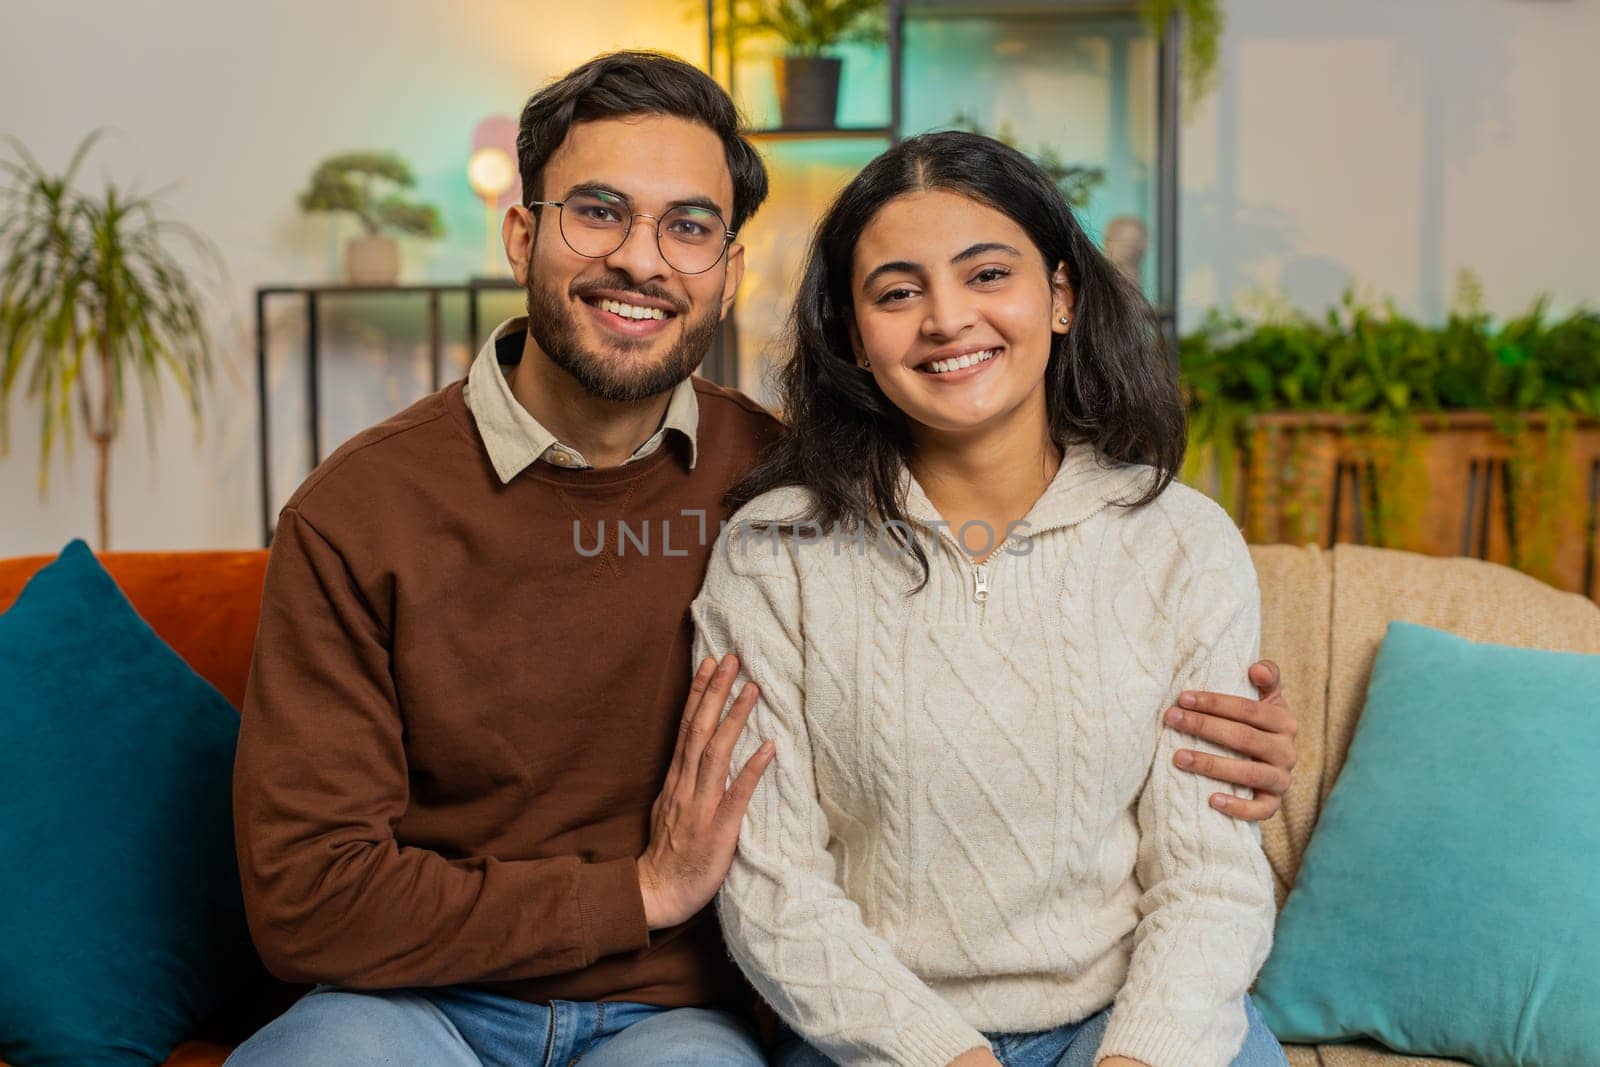 Loving young diverse couple looking at camera and smiling sitting arm around relaxing on sofa. Happy Indian family spending leisure time together on couch looking at camera in living room at home.